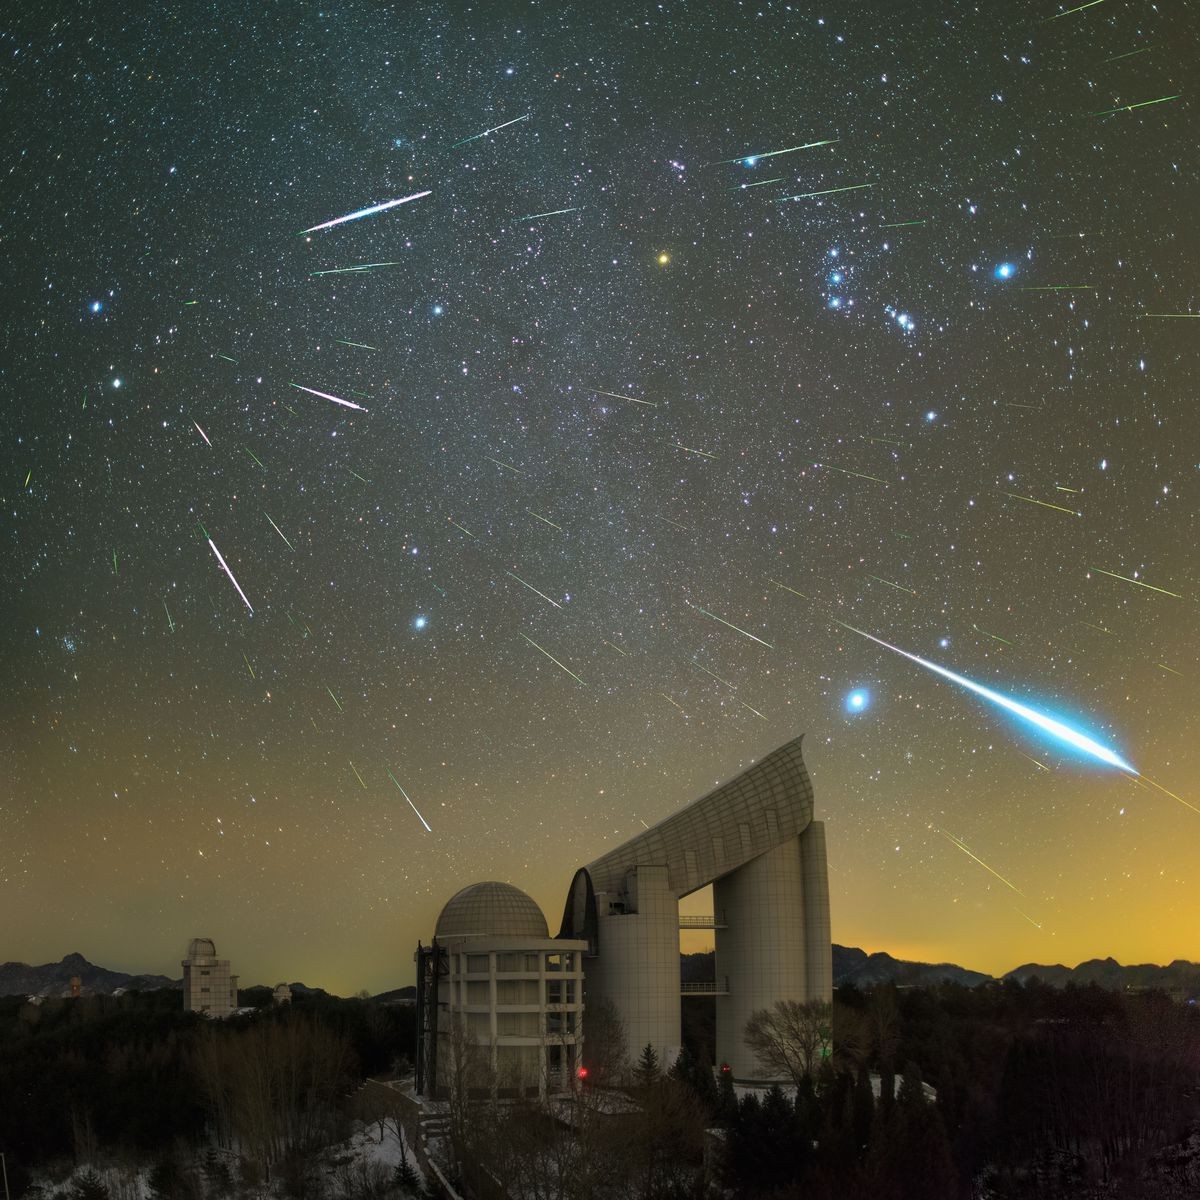 General 1200x1200 architecture building nature landscape trees telescope astronomy meteors geminids long exposure night clear sky stars observatory China LAMOST Geminid meteor shower Xinglong National Astronomical Observatory Hebei Province